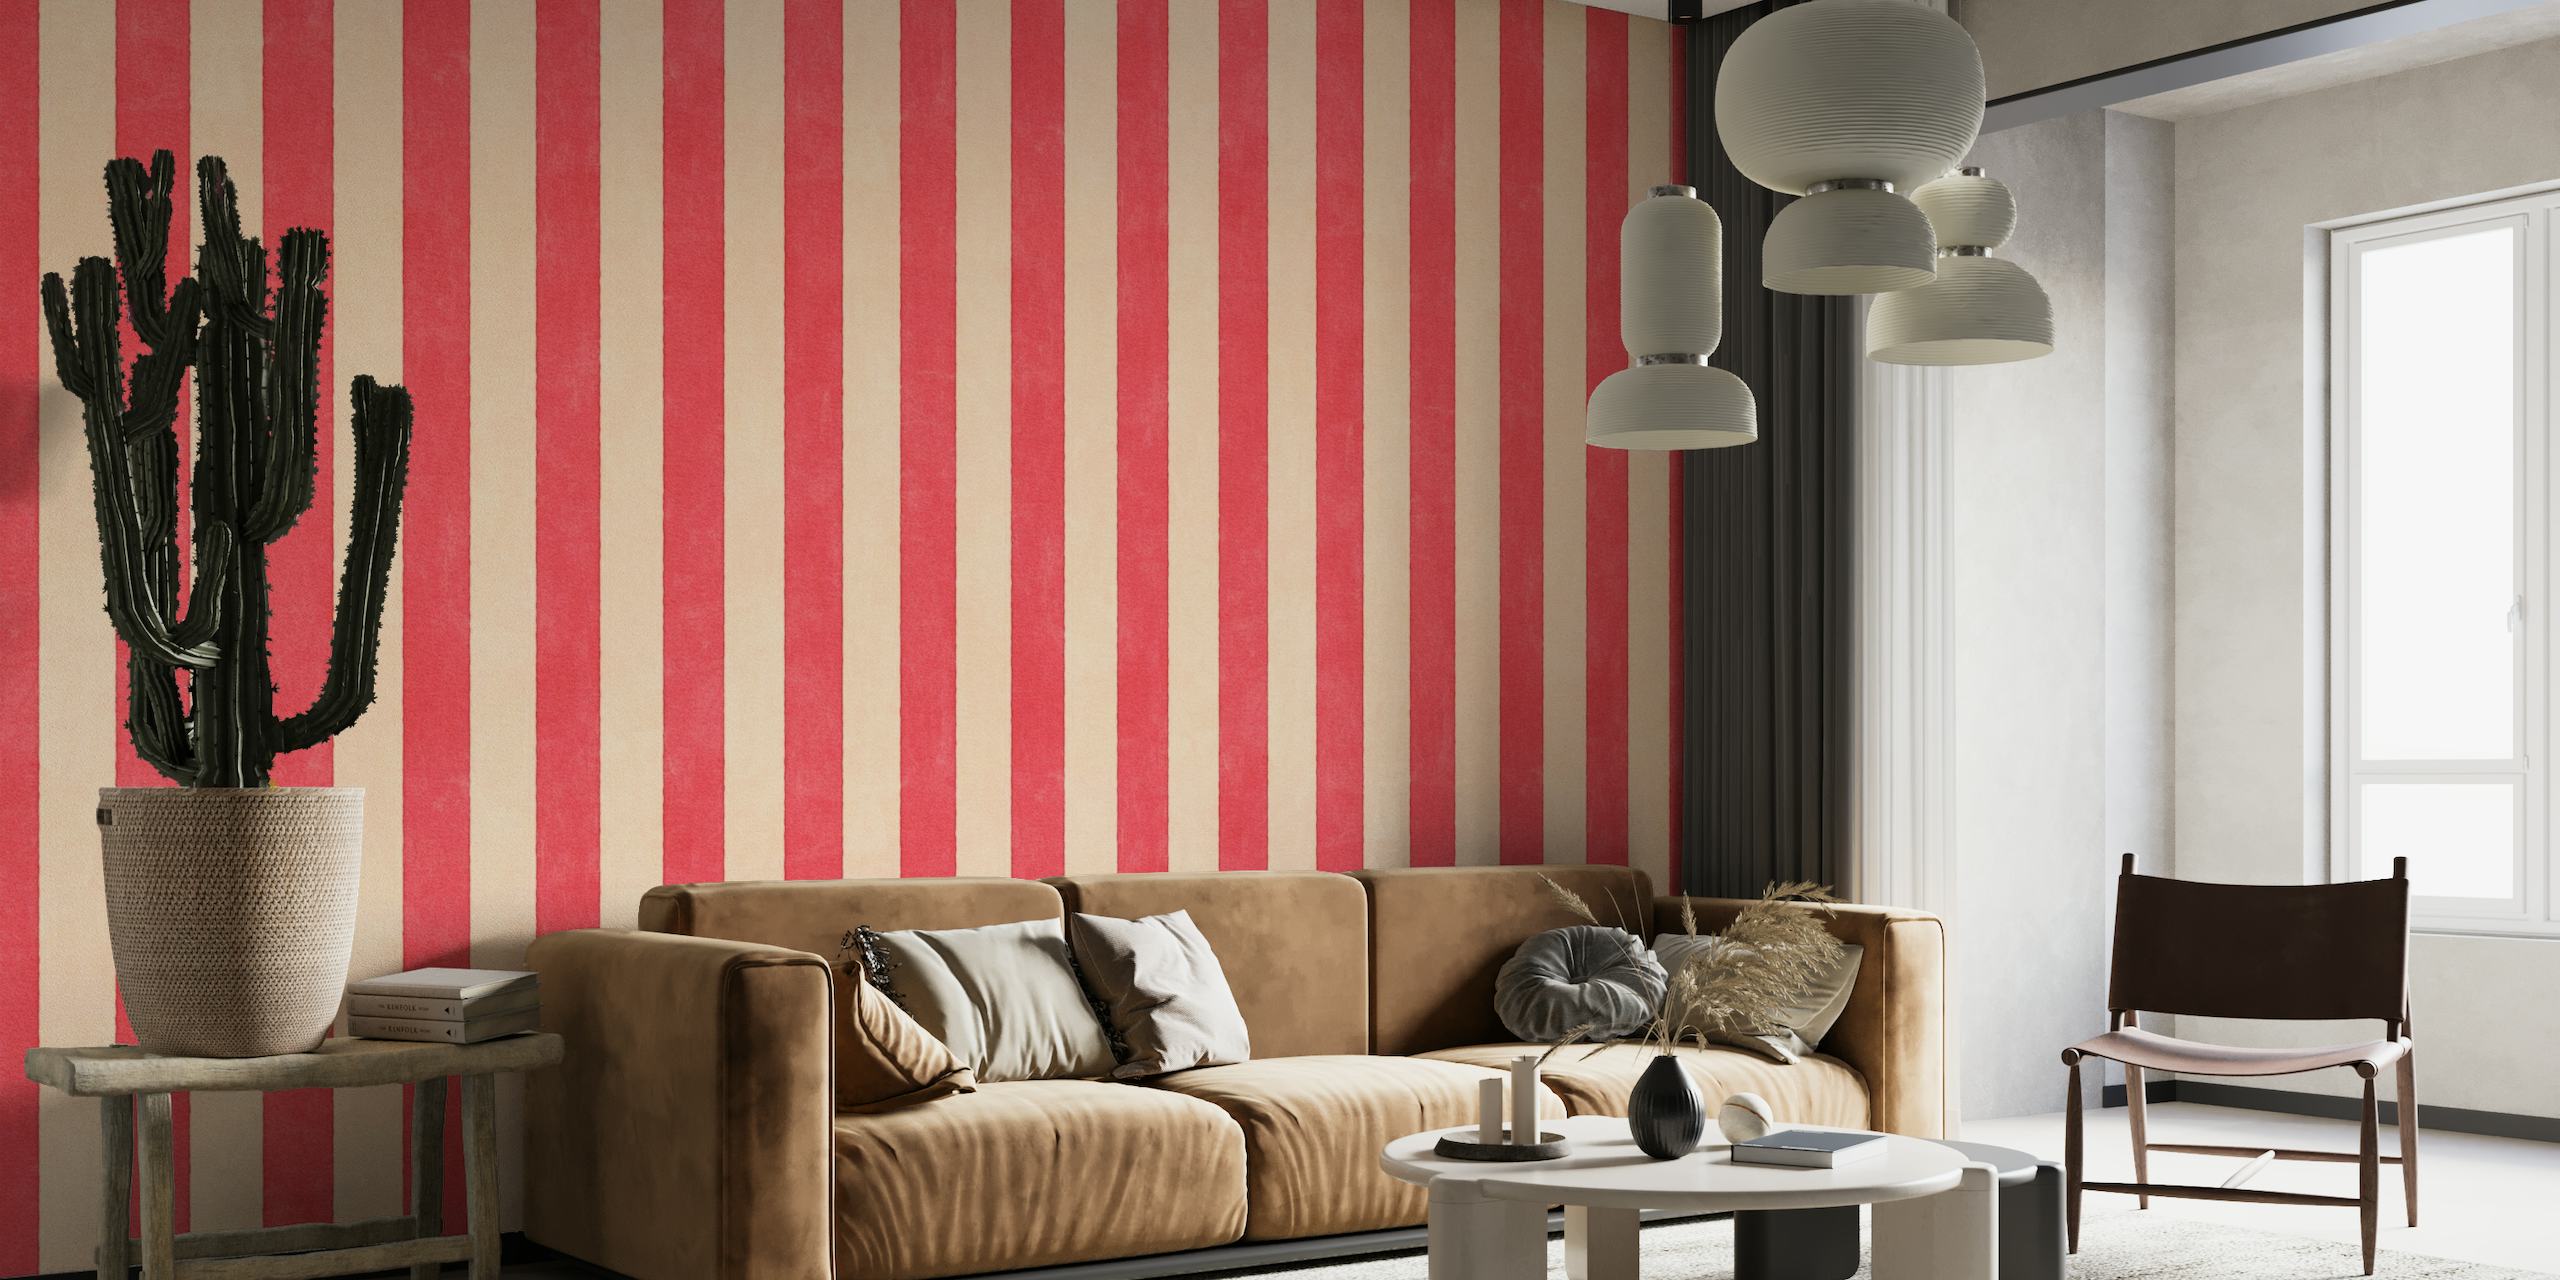 STRIPES 001 C - Strawberry wall mural with warm red and white stripes